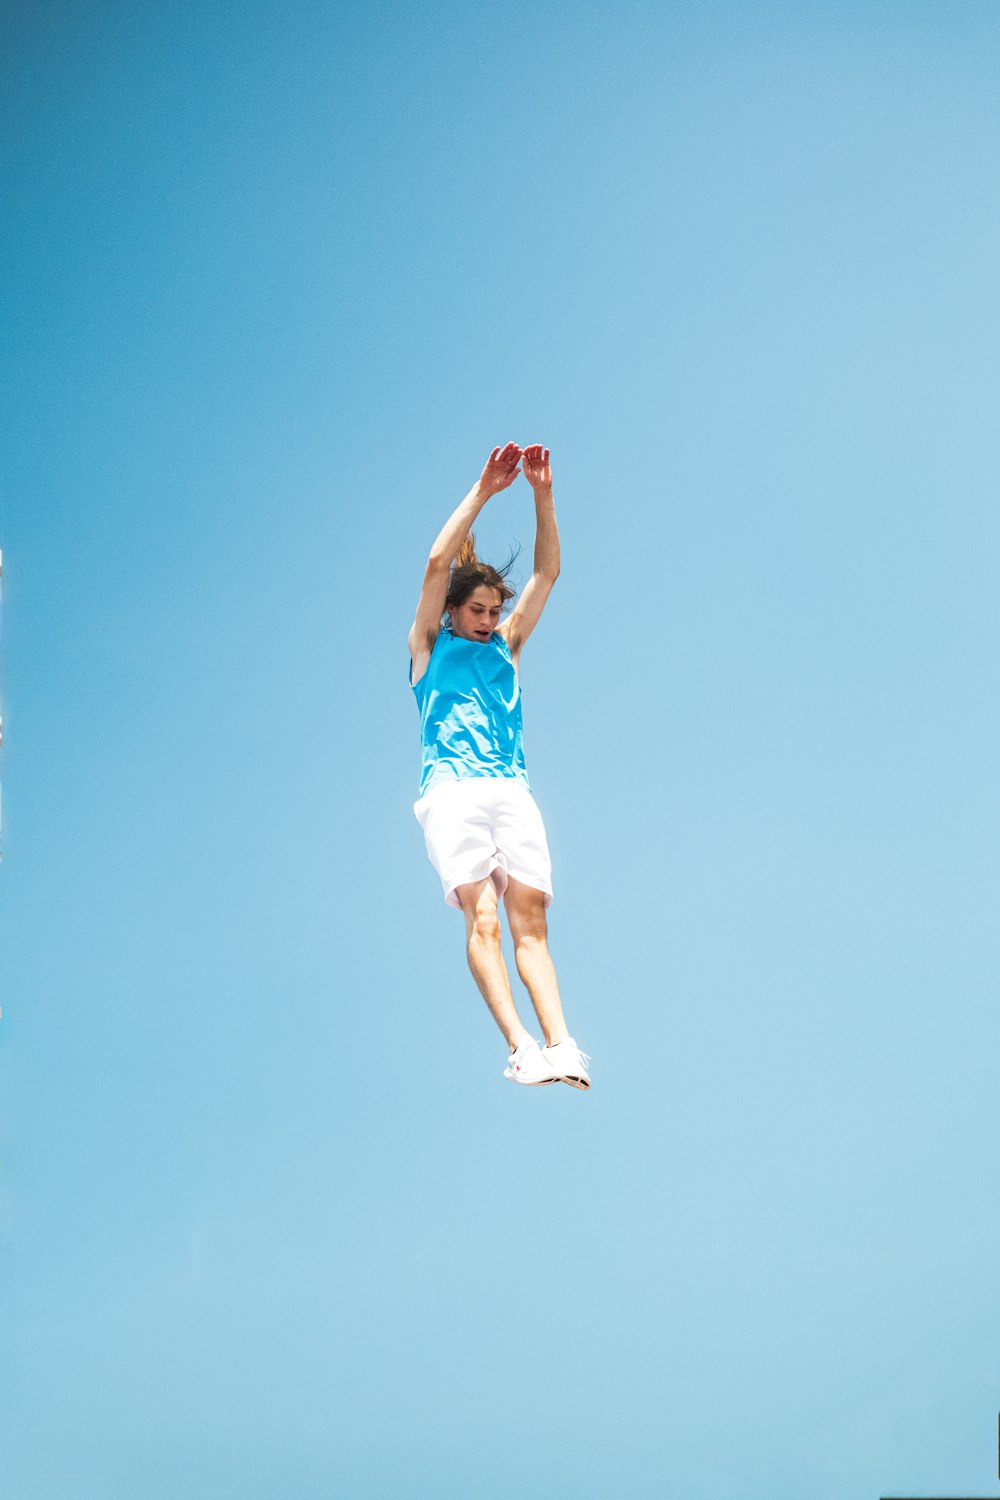 a person jumping in the air